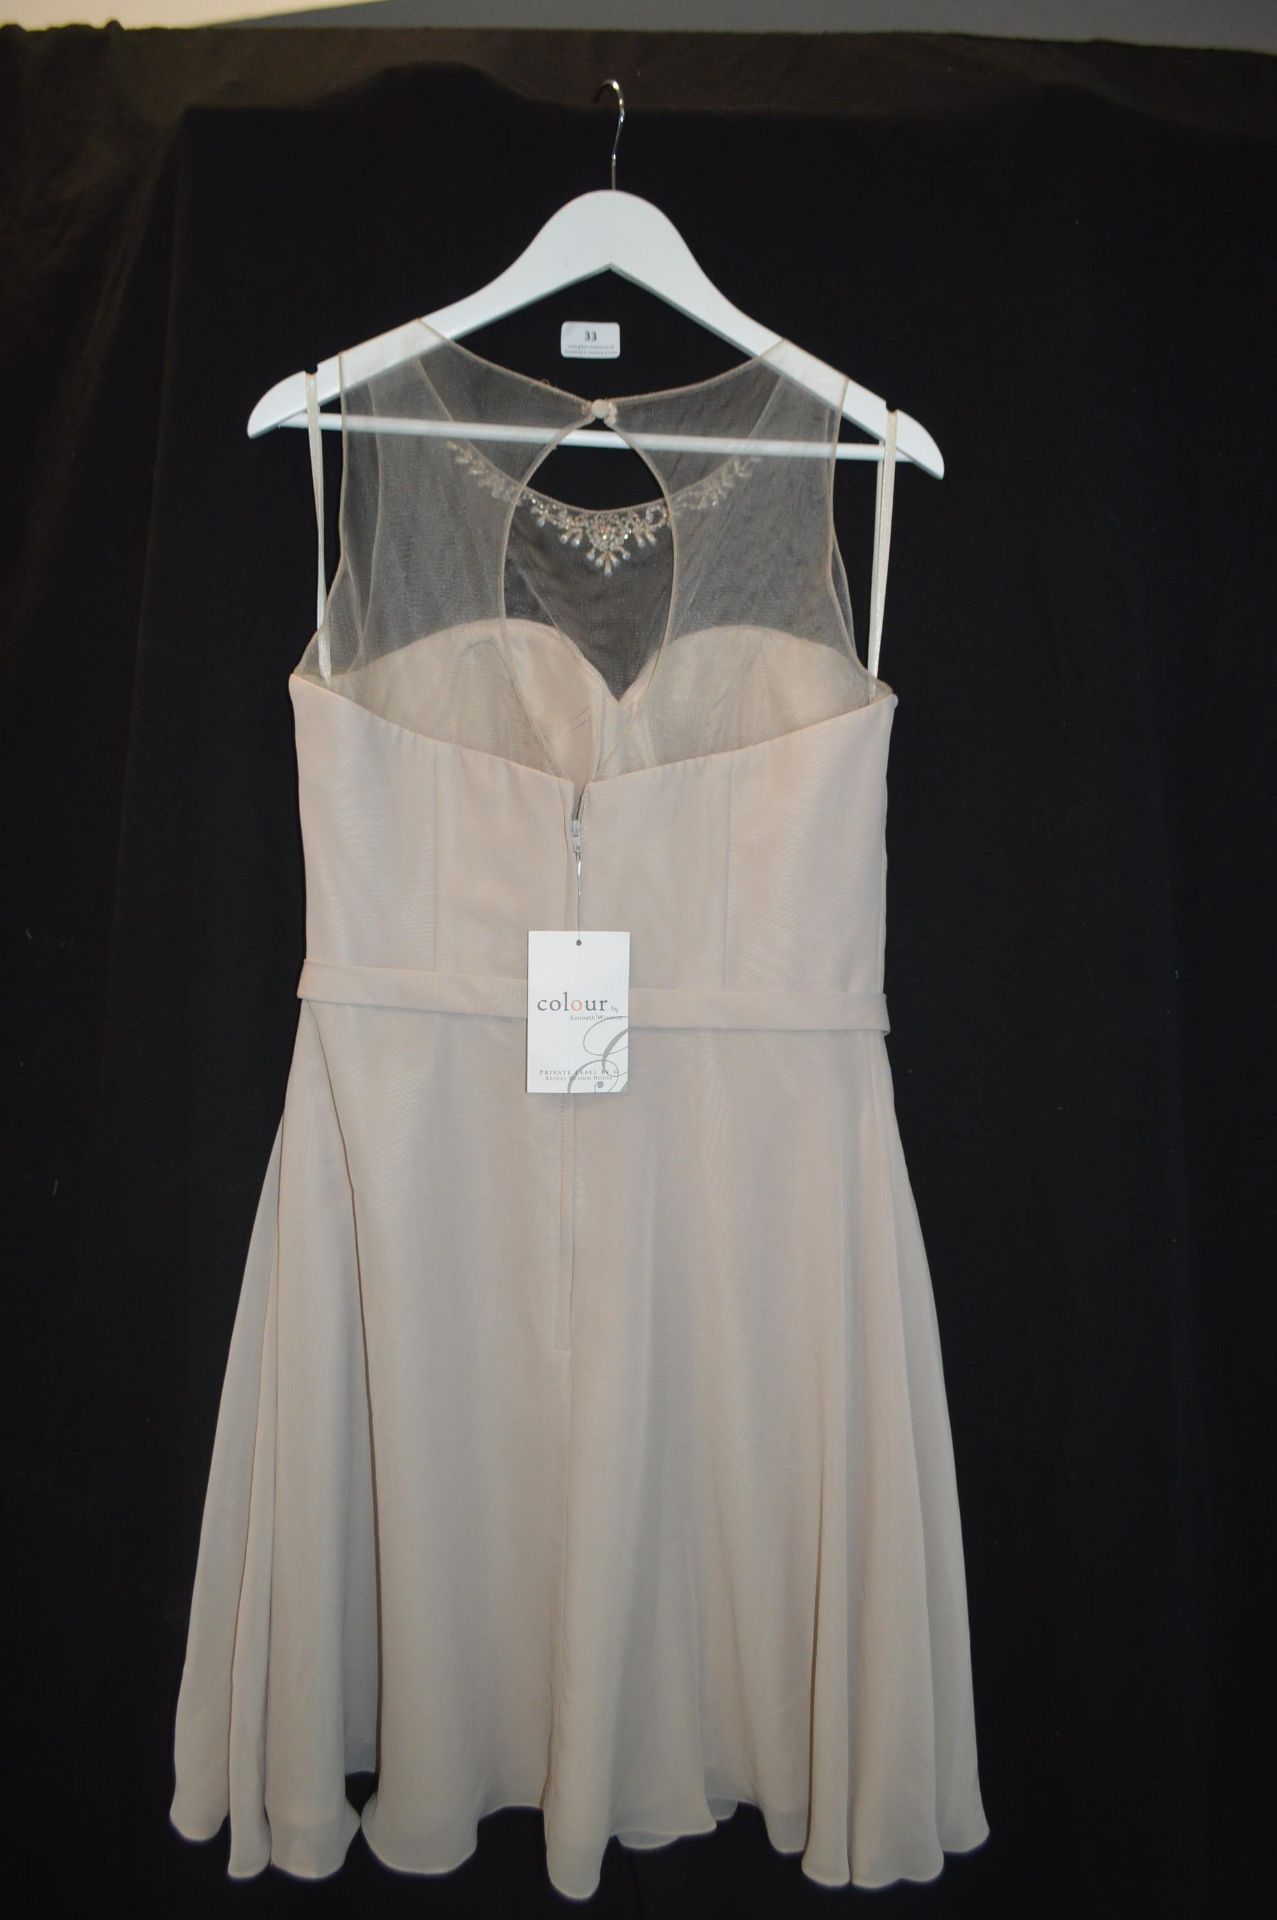 Prom Dress in Cappuccino by Kenneth Winston for Private Label Size: 14 - Image 2 of 2